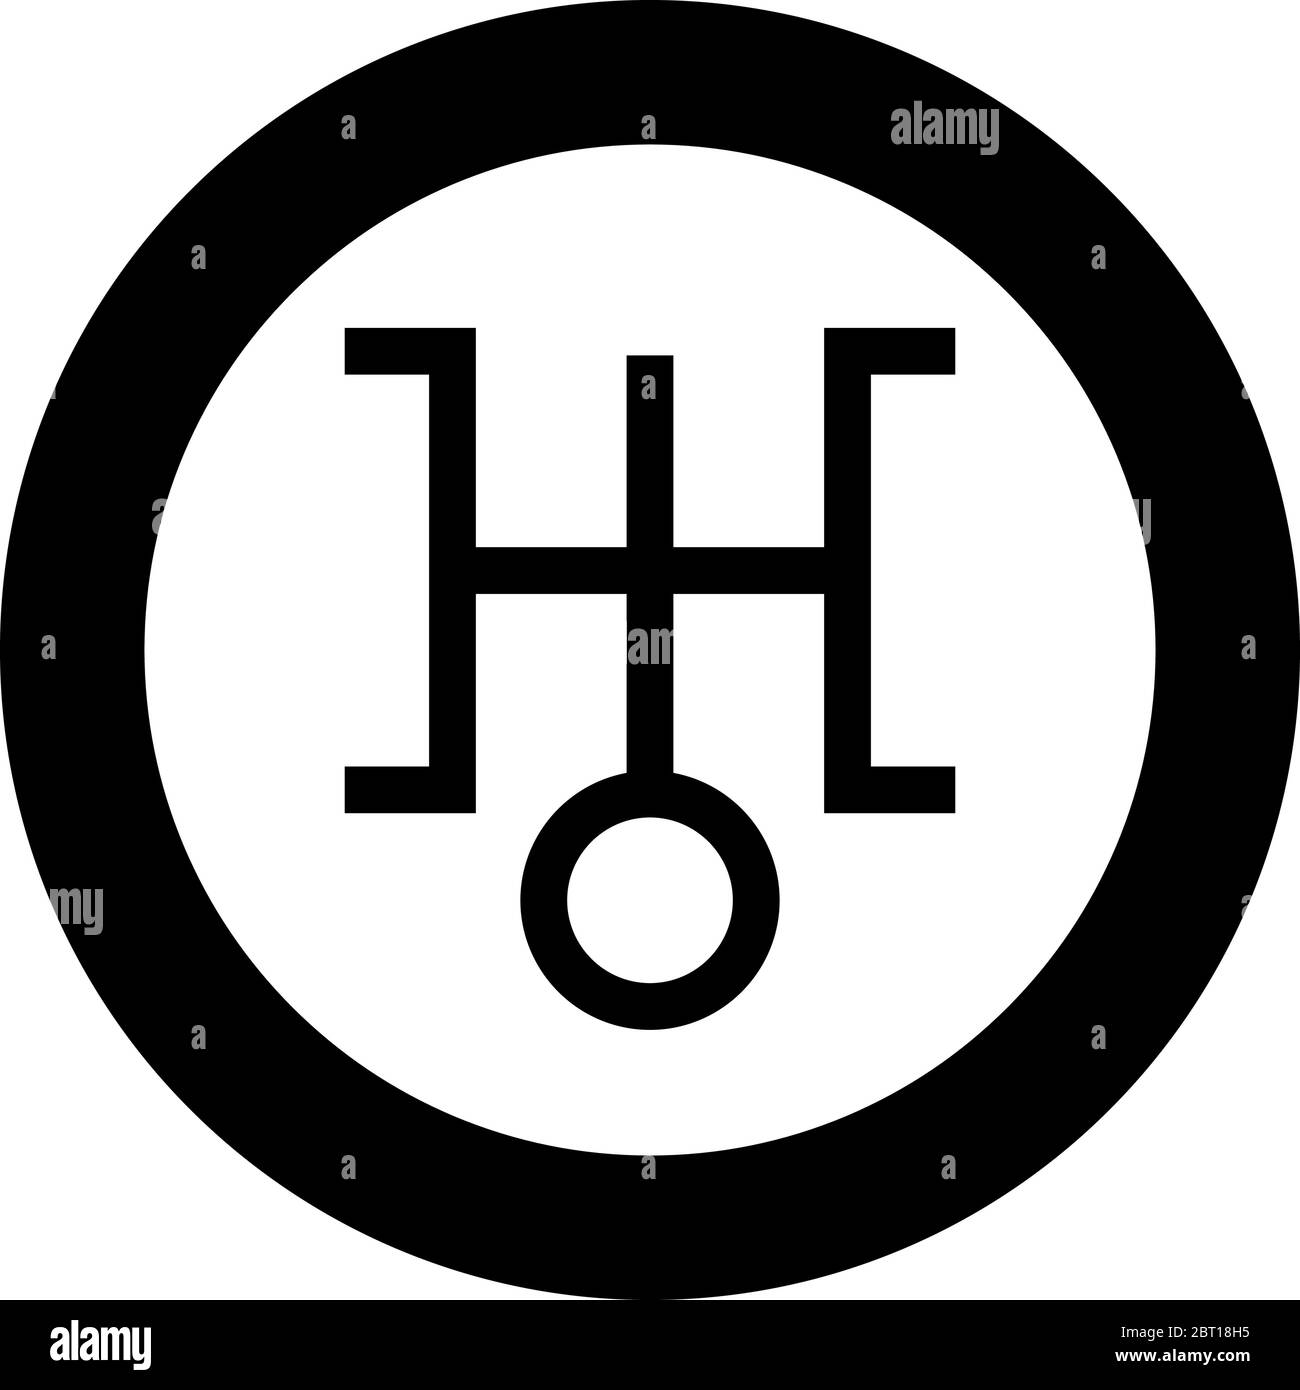 Symbol uranus icon in circle round black color vector illustration flat style simple image Stock Vector